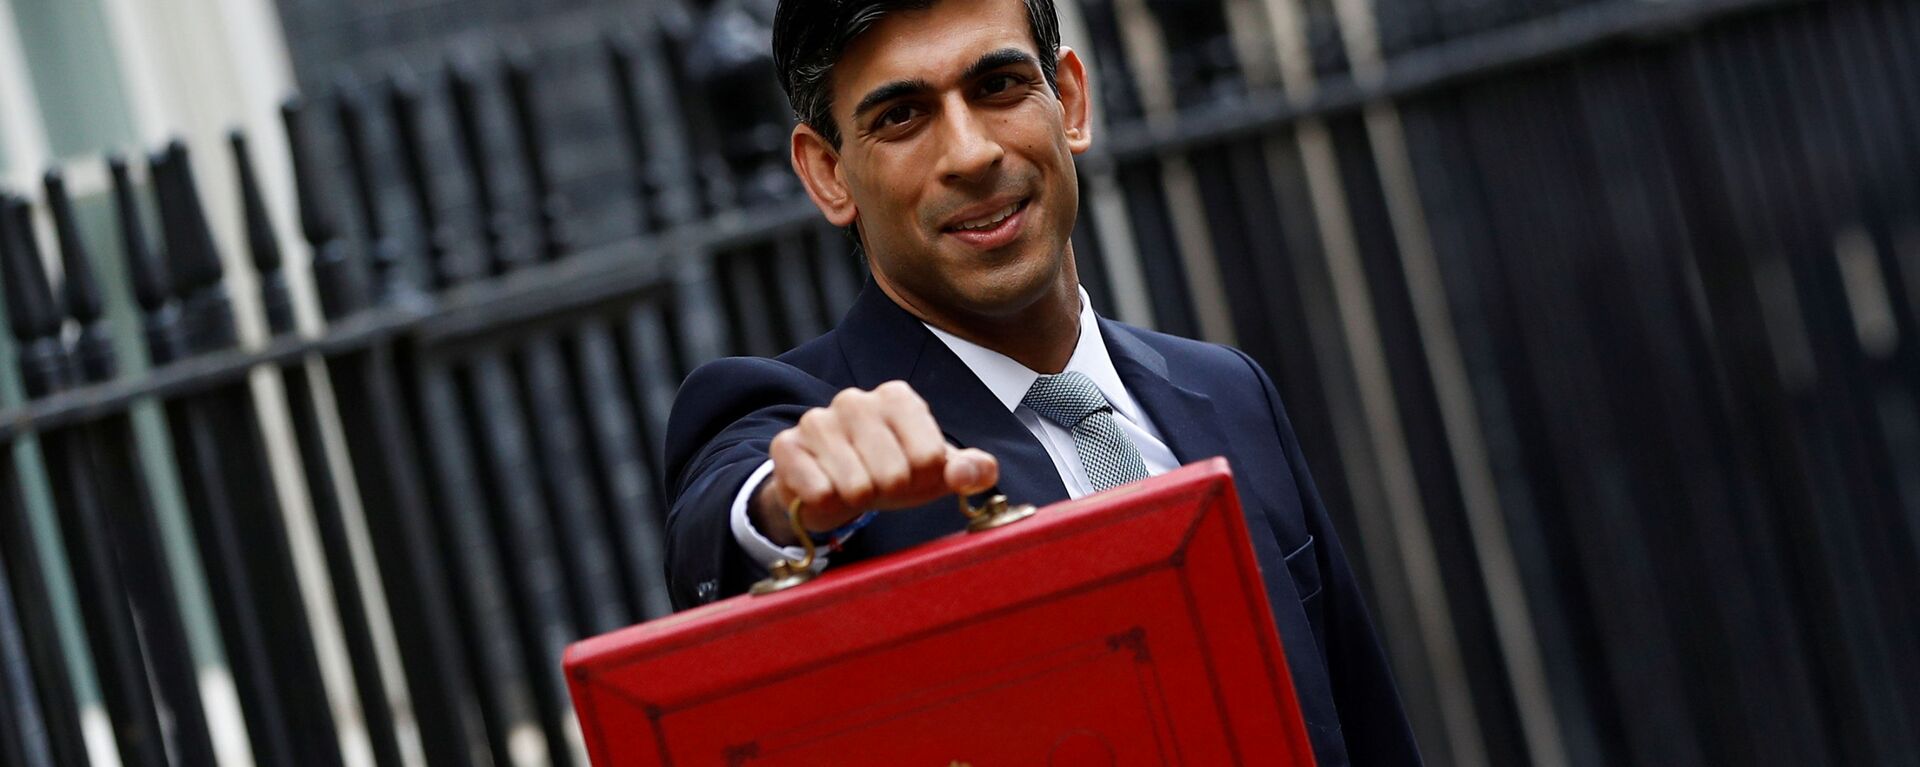 FILE PHOTO: Britain's Chancellor of the Exchequer Rishi Sunak holds the budget box outside his office in Downing Street in London - Sputnik International, 1920, 24.10.2021